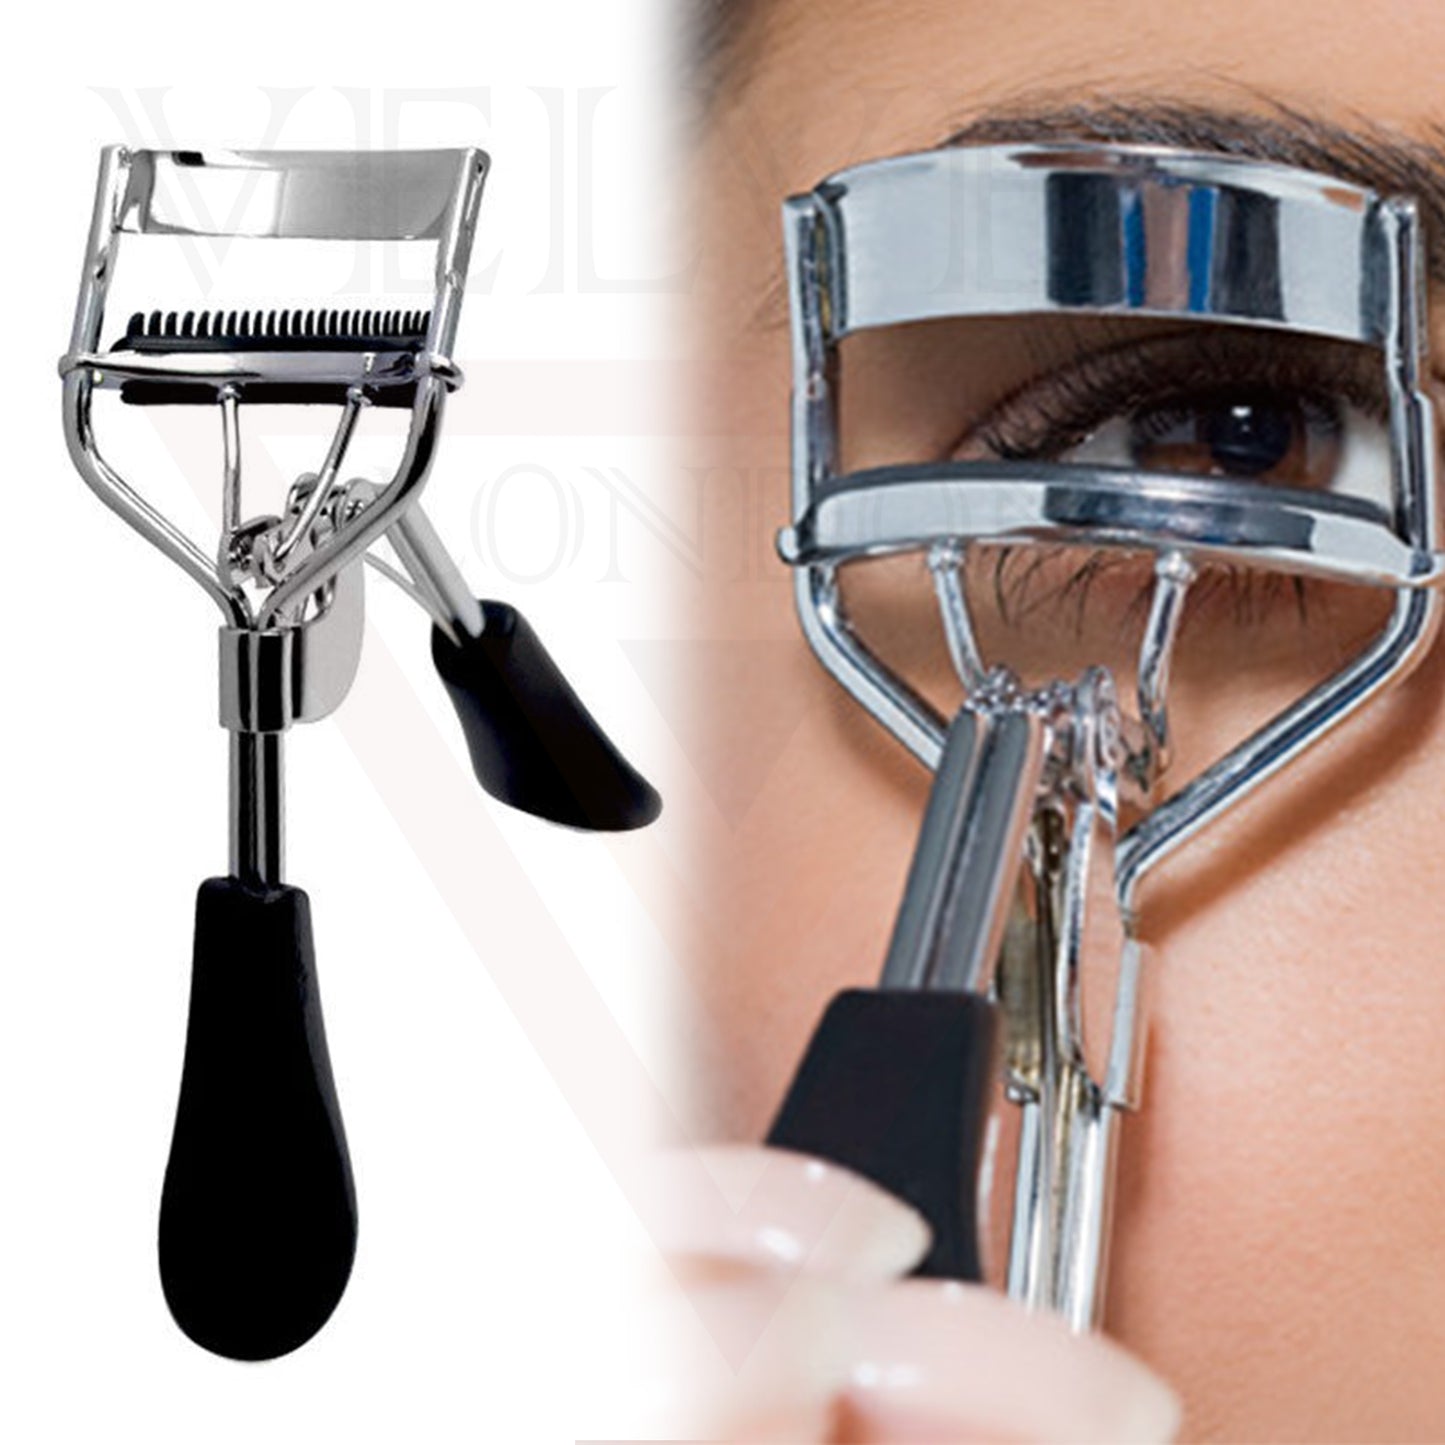 Eyelash Curler Lash Curler With Silicone Pad Beauty Makeup Tools